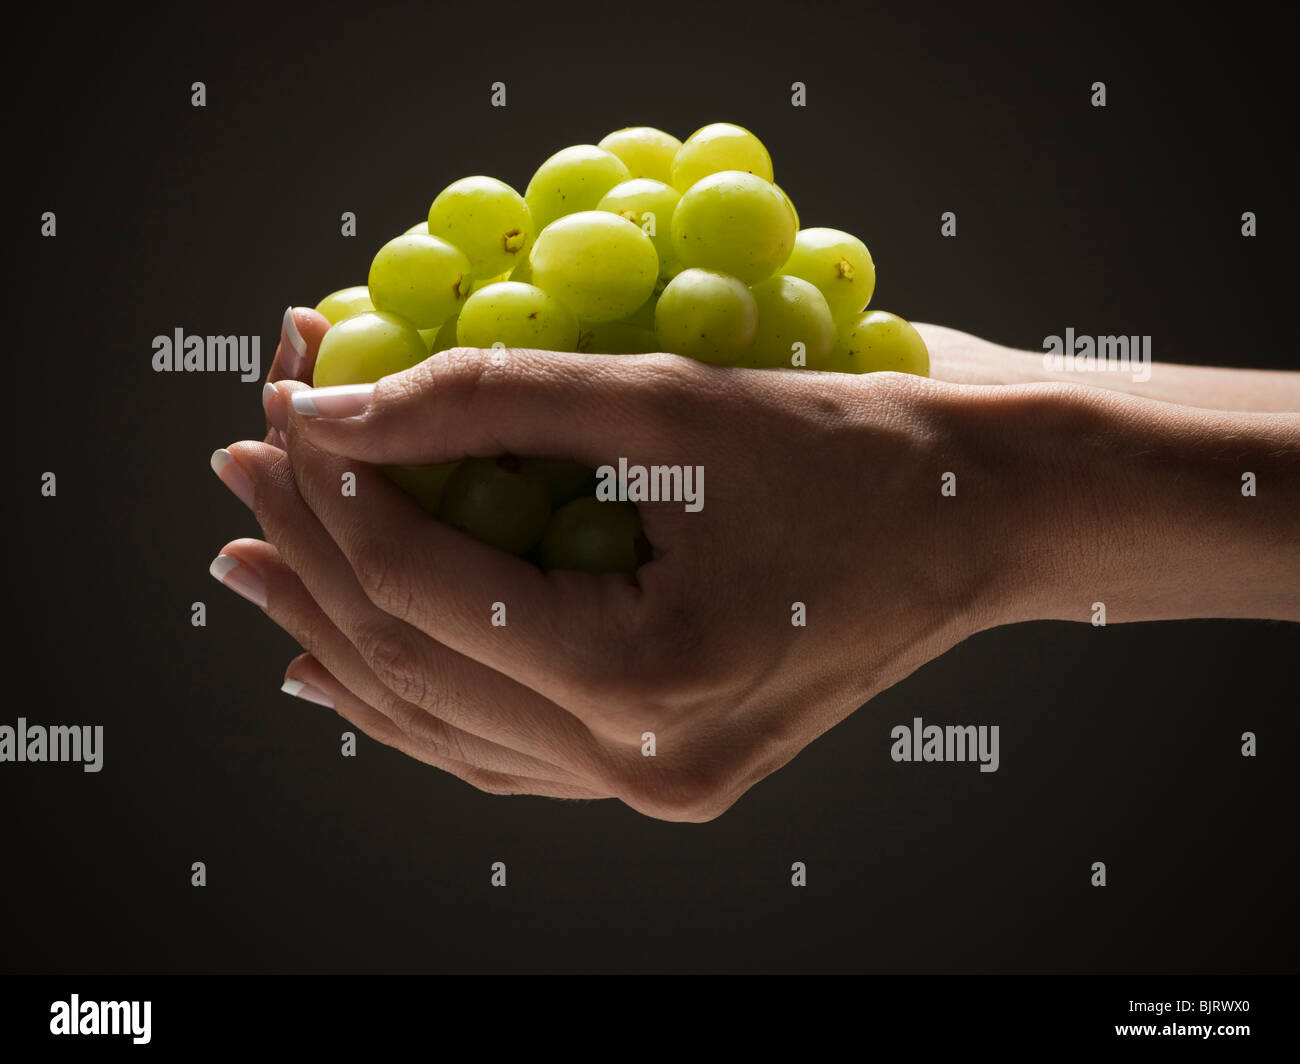 Hand holding grapes Stock Photo